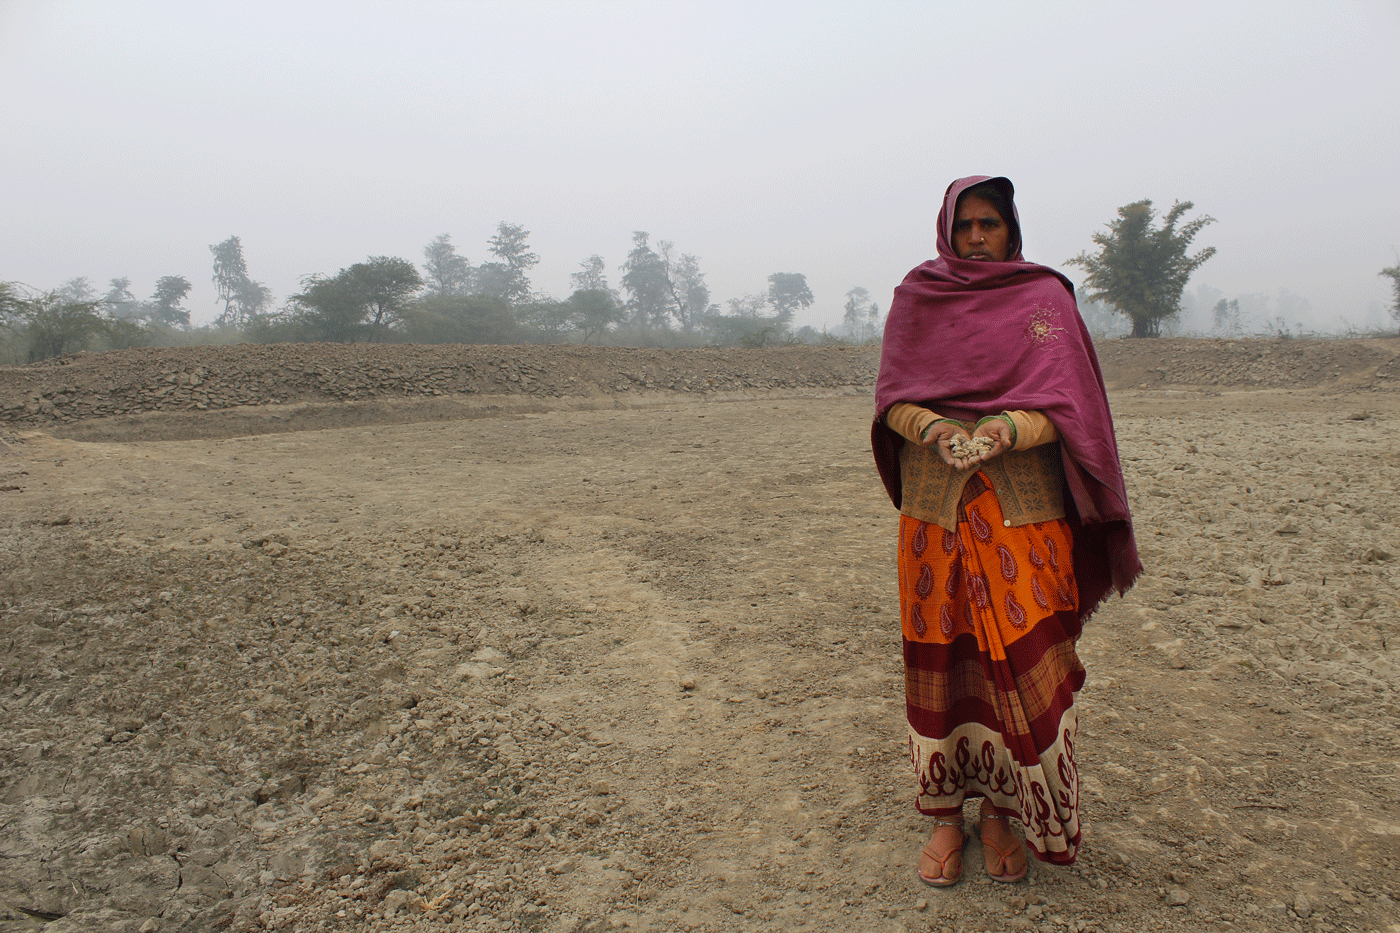 Mula standing in an abandoned land at her village